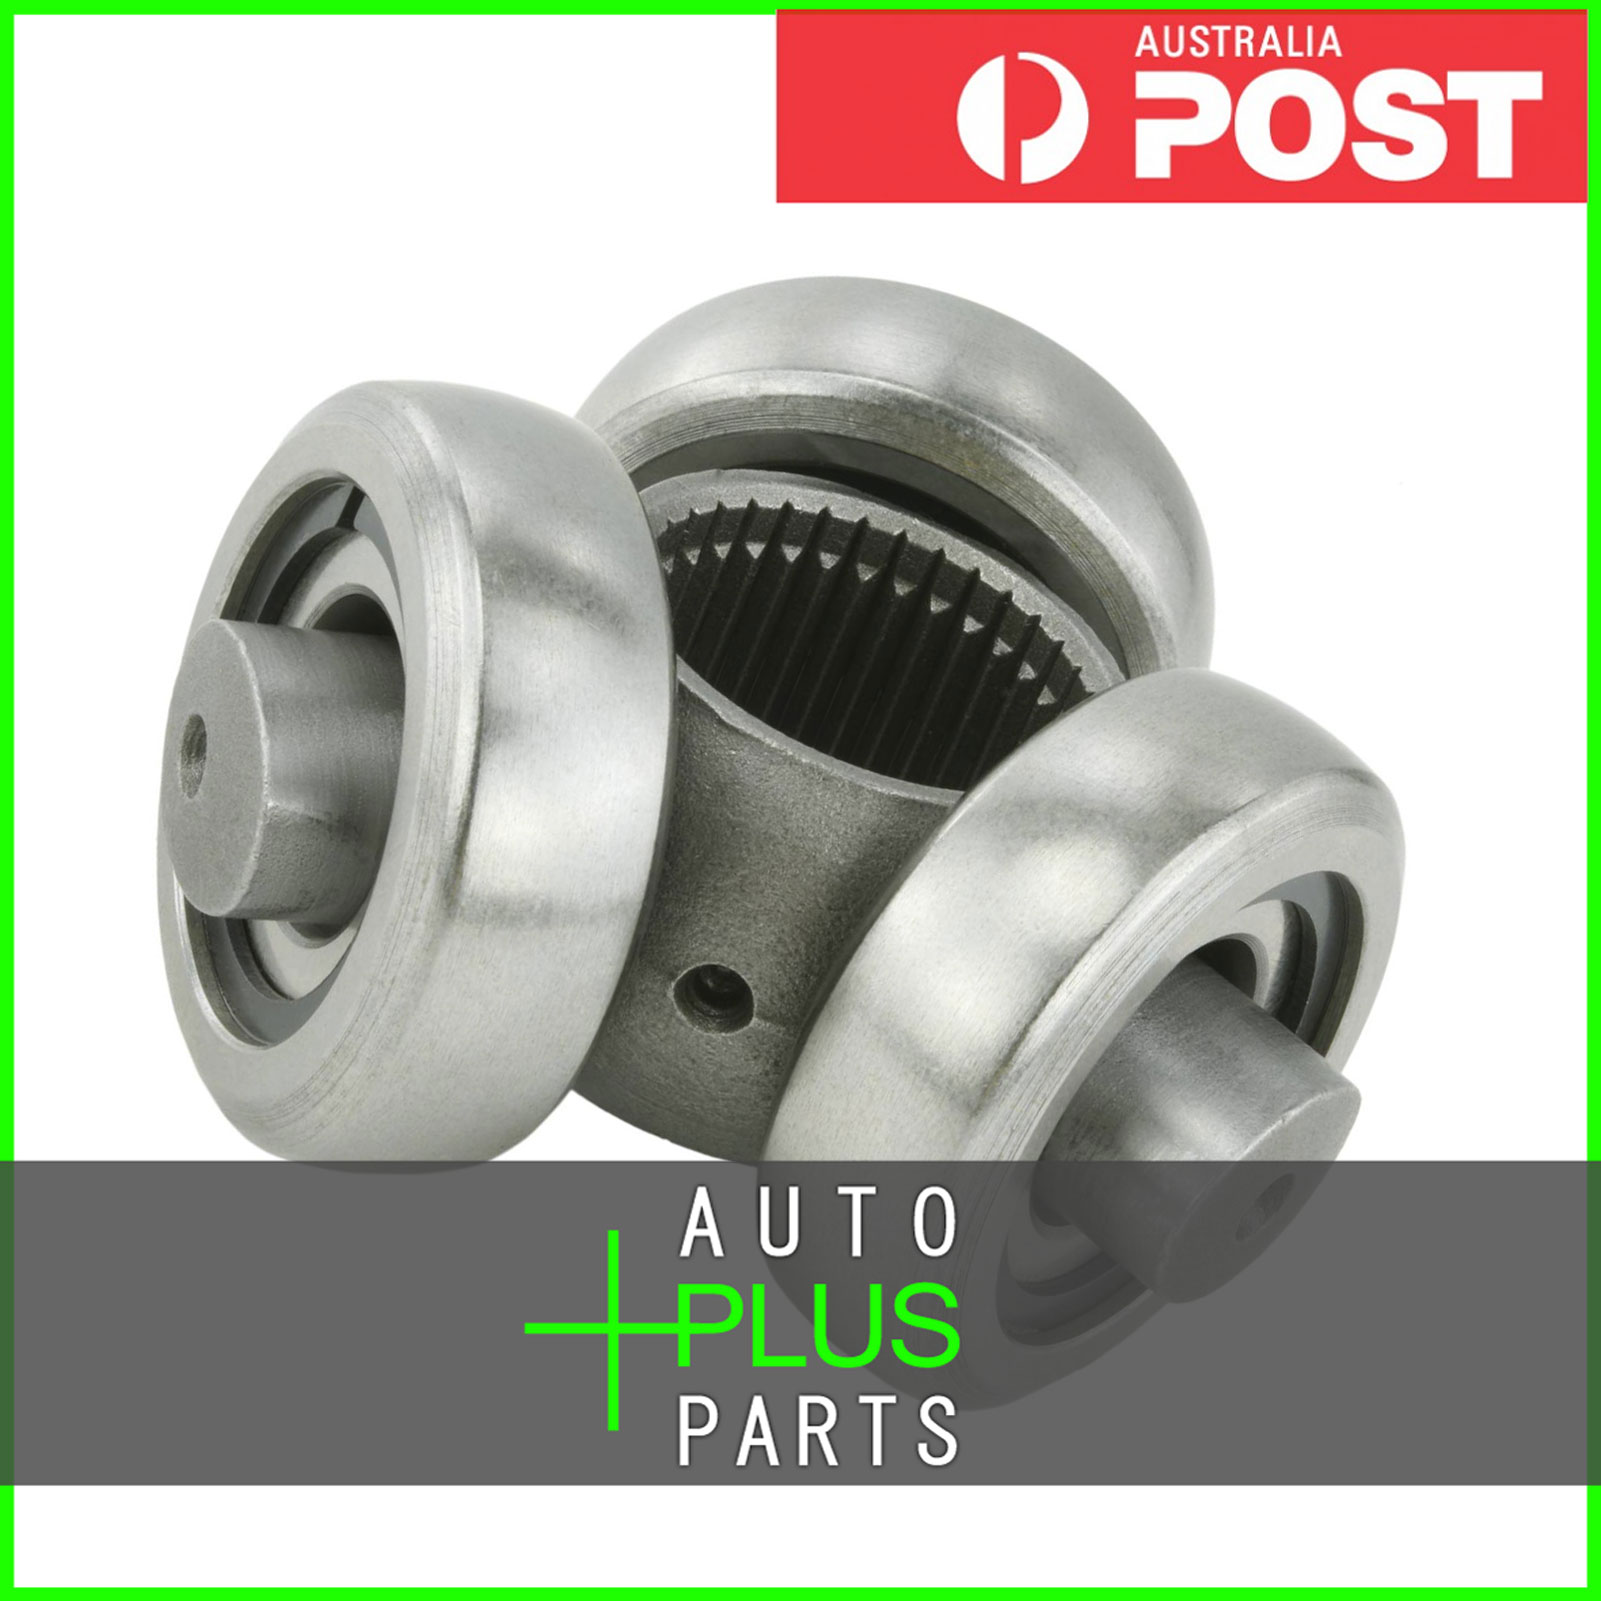 Fits LEXUS RX400H MHU38 4WD 2005-2008 - Spider Assembly Slide Joint 35X46.05 Product Photo